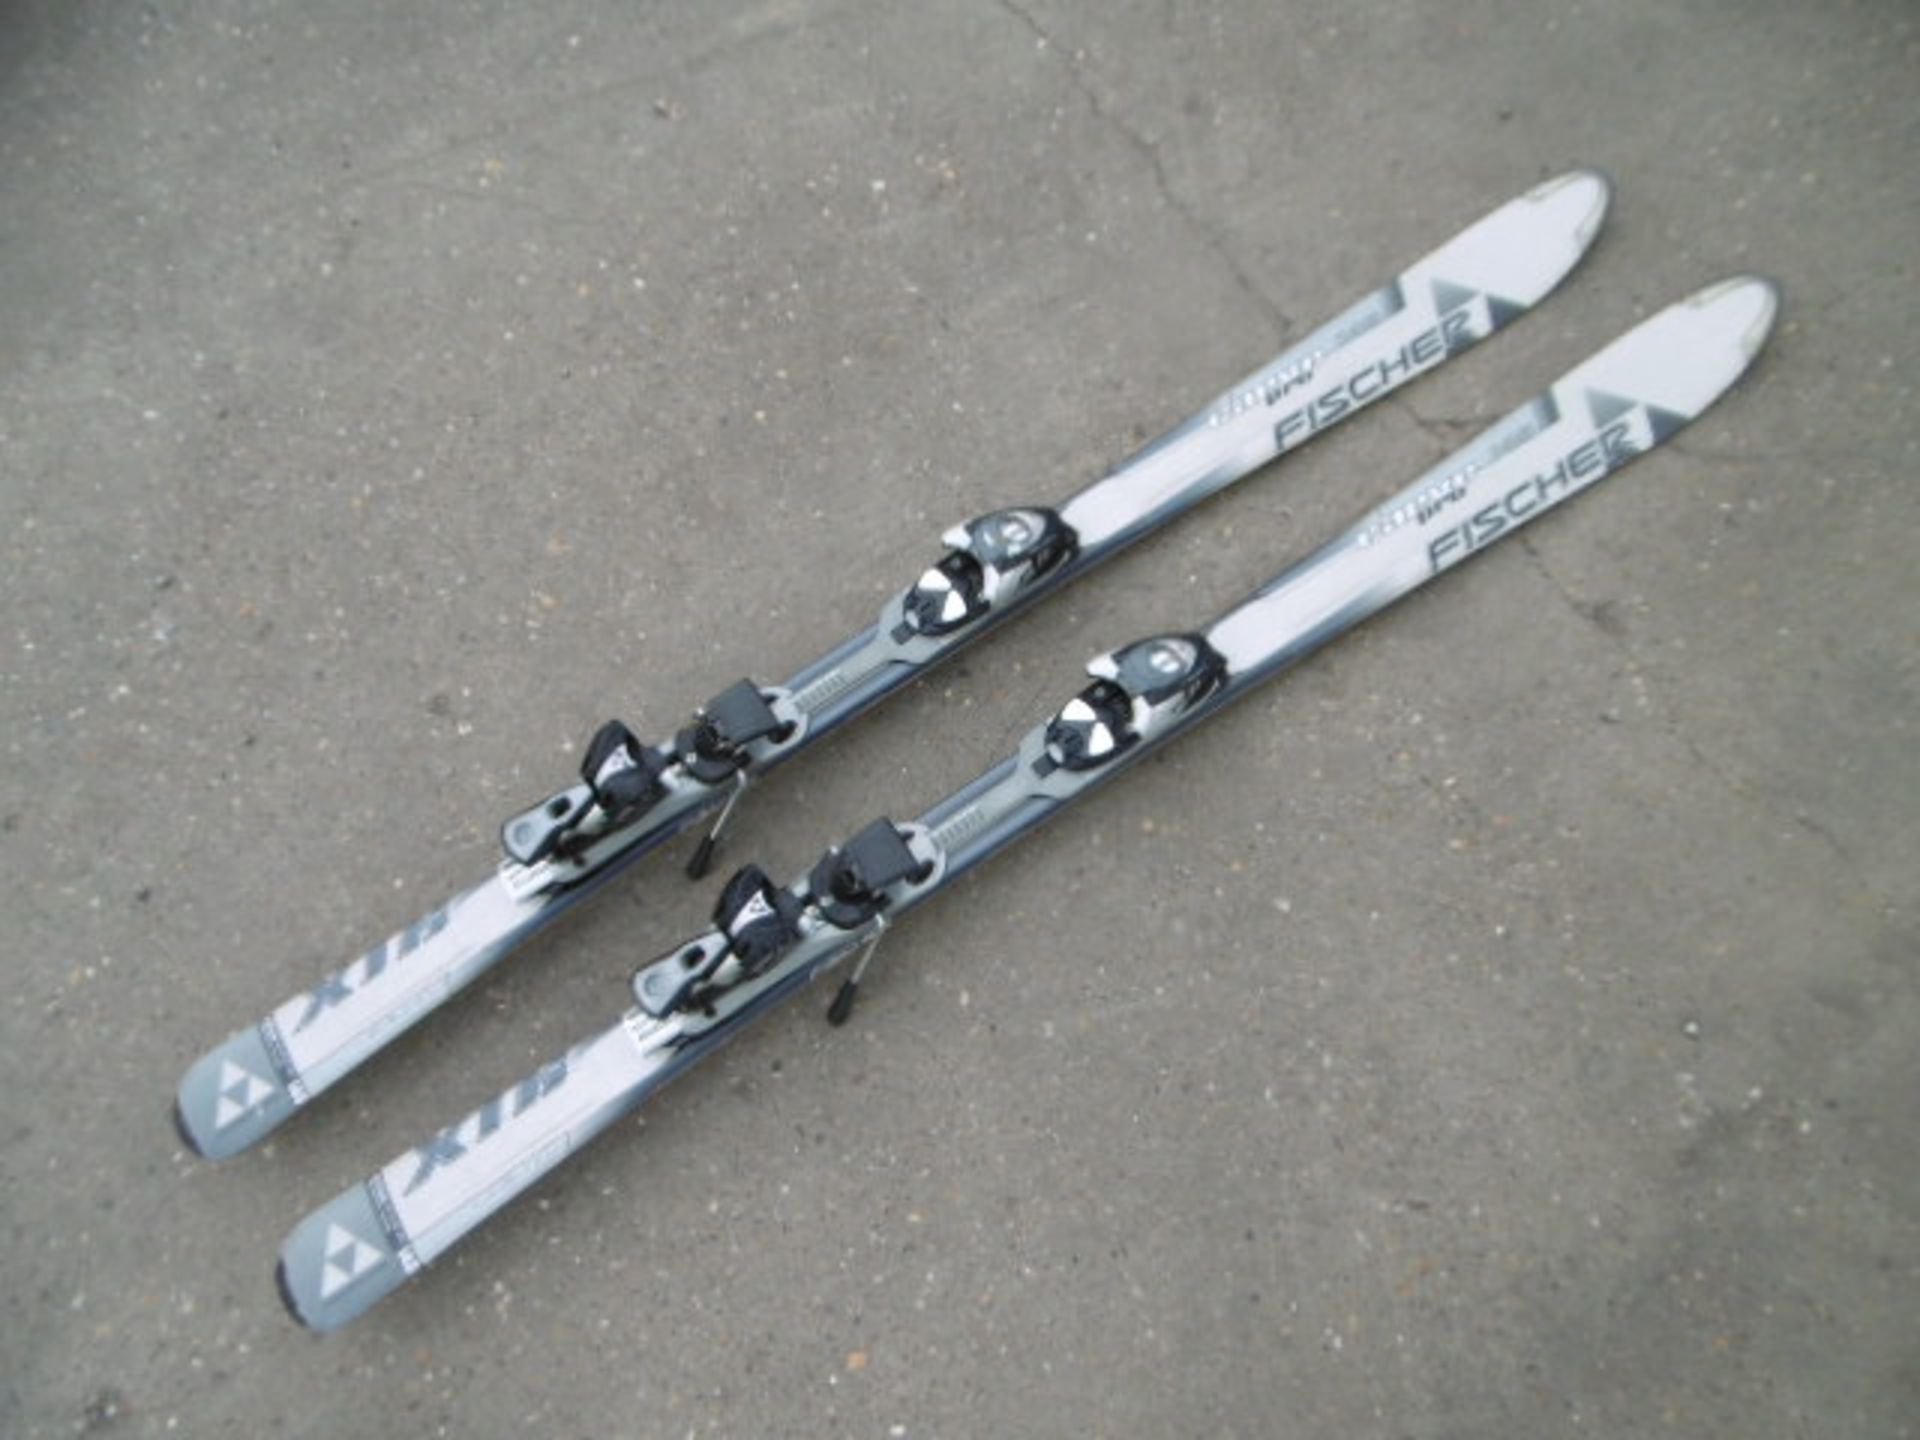 Fischer Carve Pro 148 Skis - Image 2 of 7